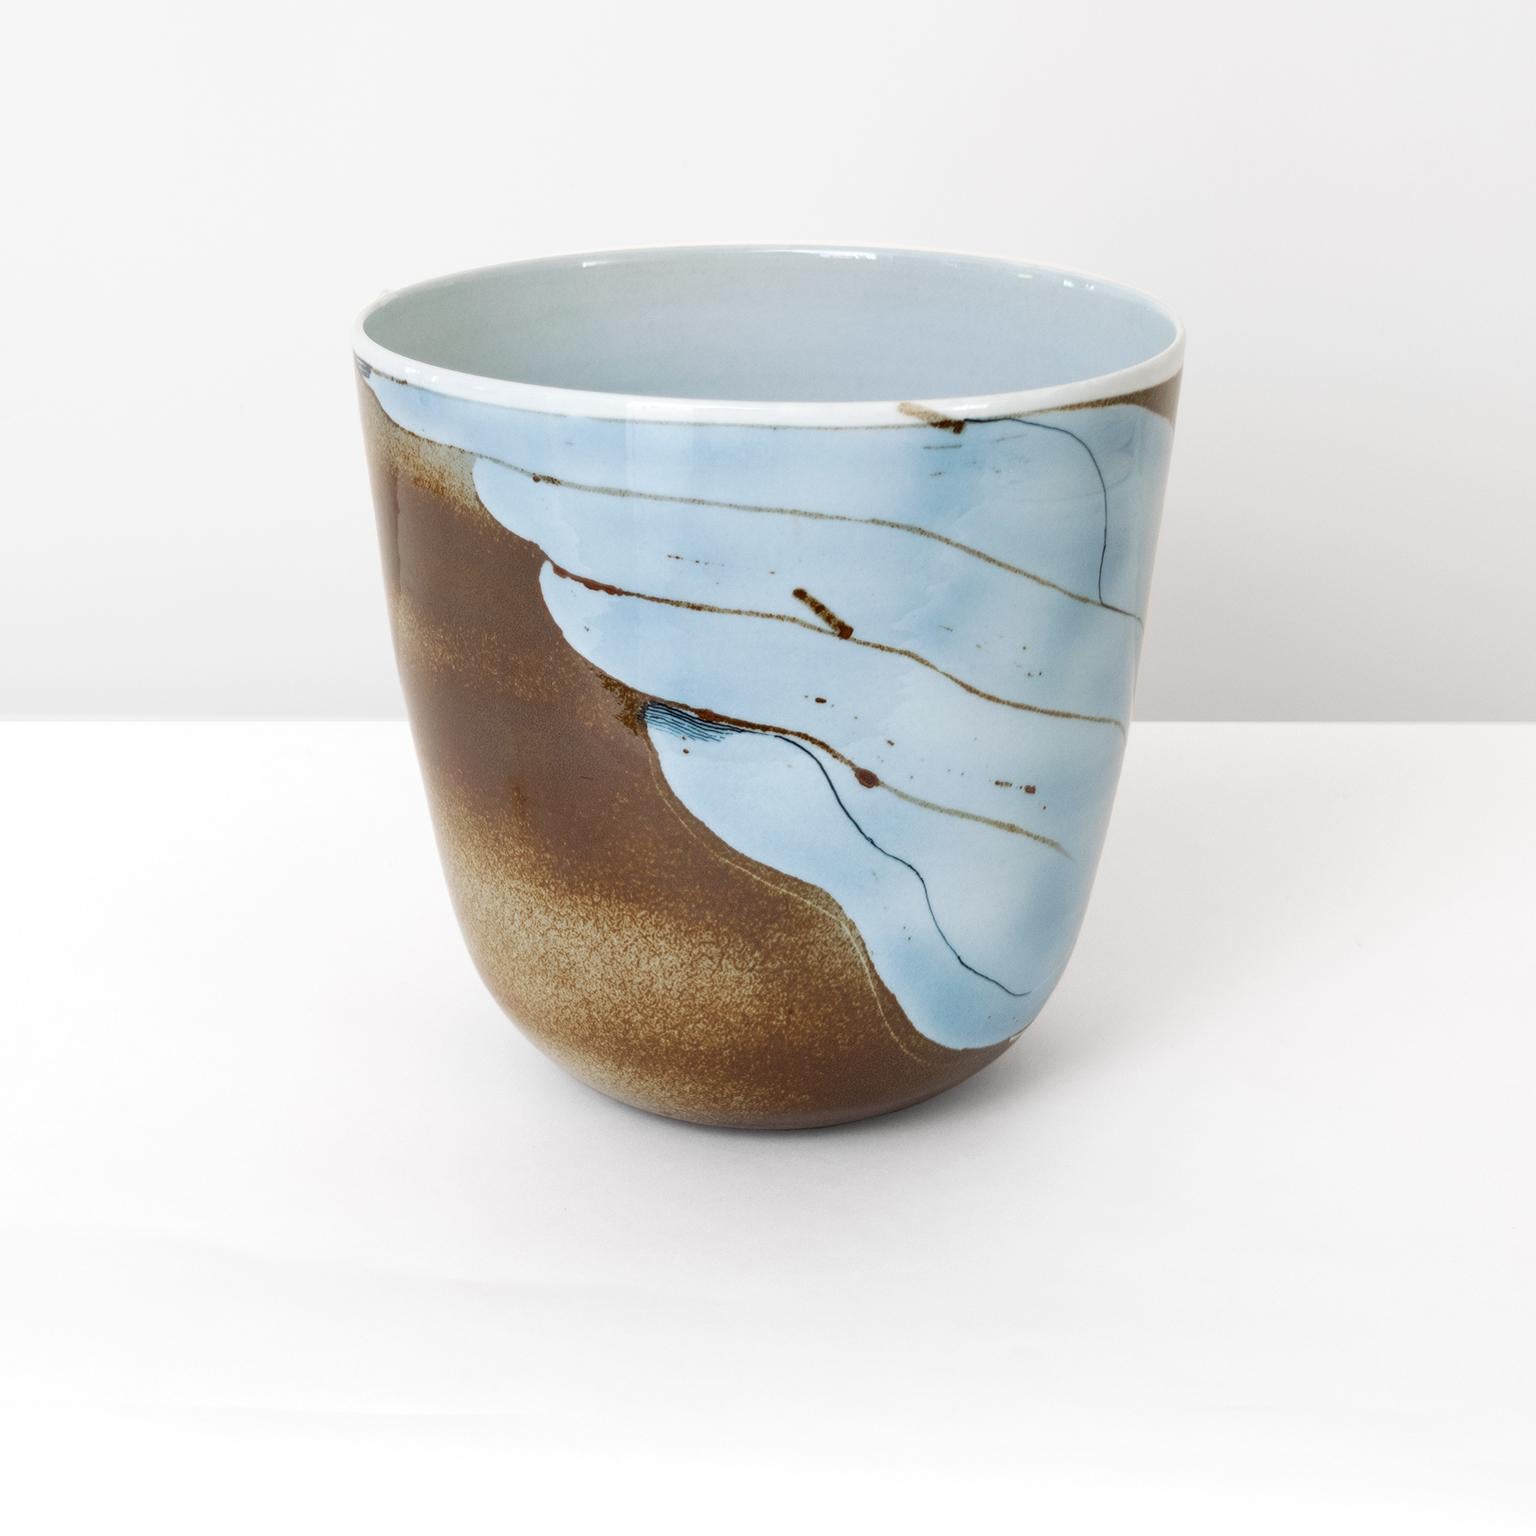 A large studio Inger Persson vase, bowl slightly oval form with a hand painted design in light blue and black on a brown and tan background, possibly an abstraction of a swan on water. Made at Rorstrand, Sweden, dated 1986. 

Measures: Height 10”,